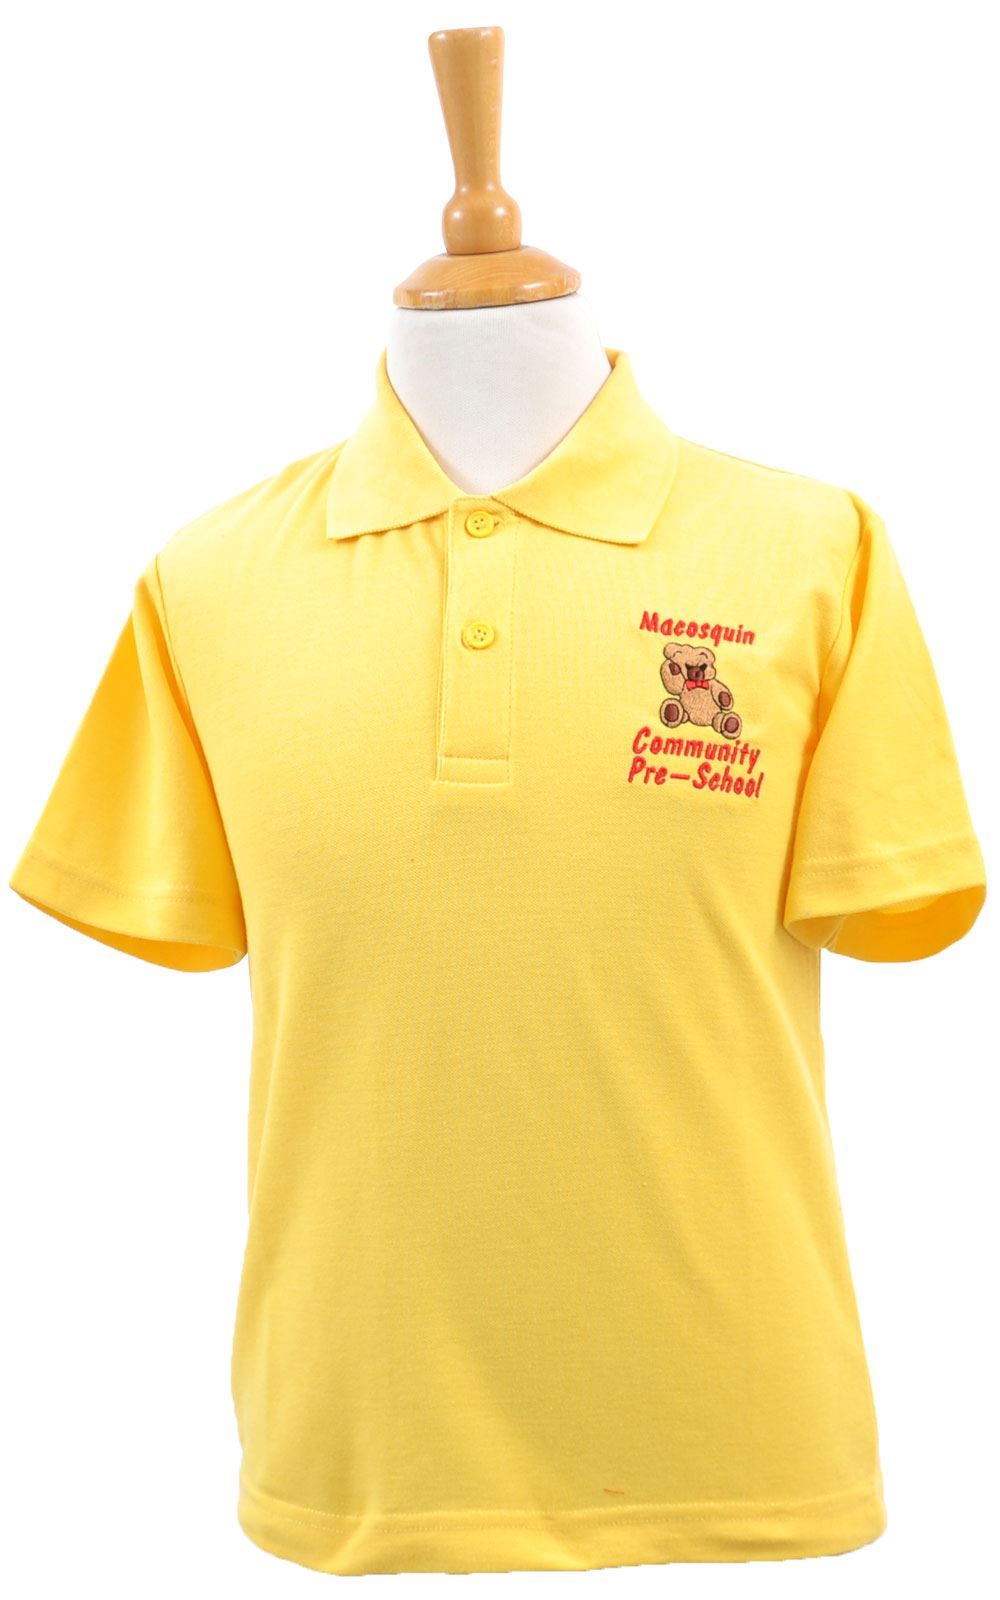 Picture of Macosquin Community Pre-School Polo Shirt - Woodbank